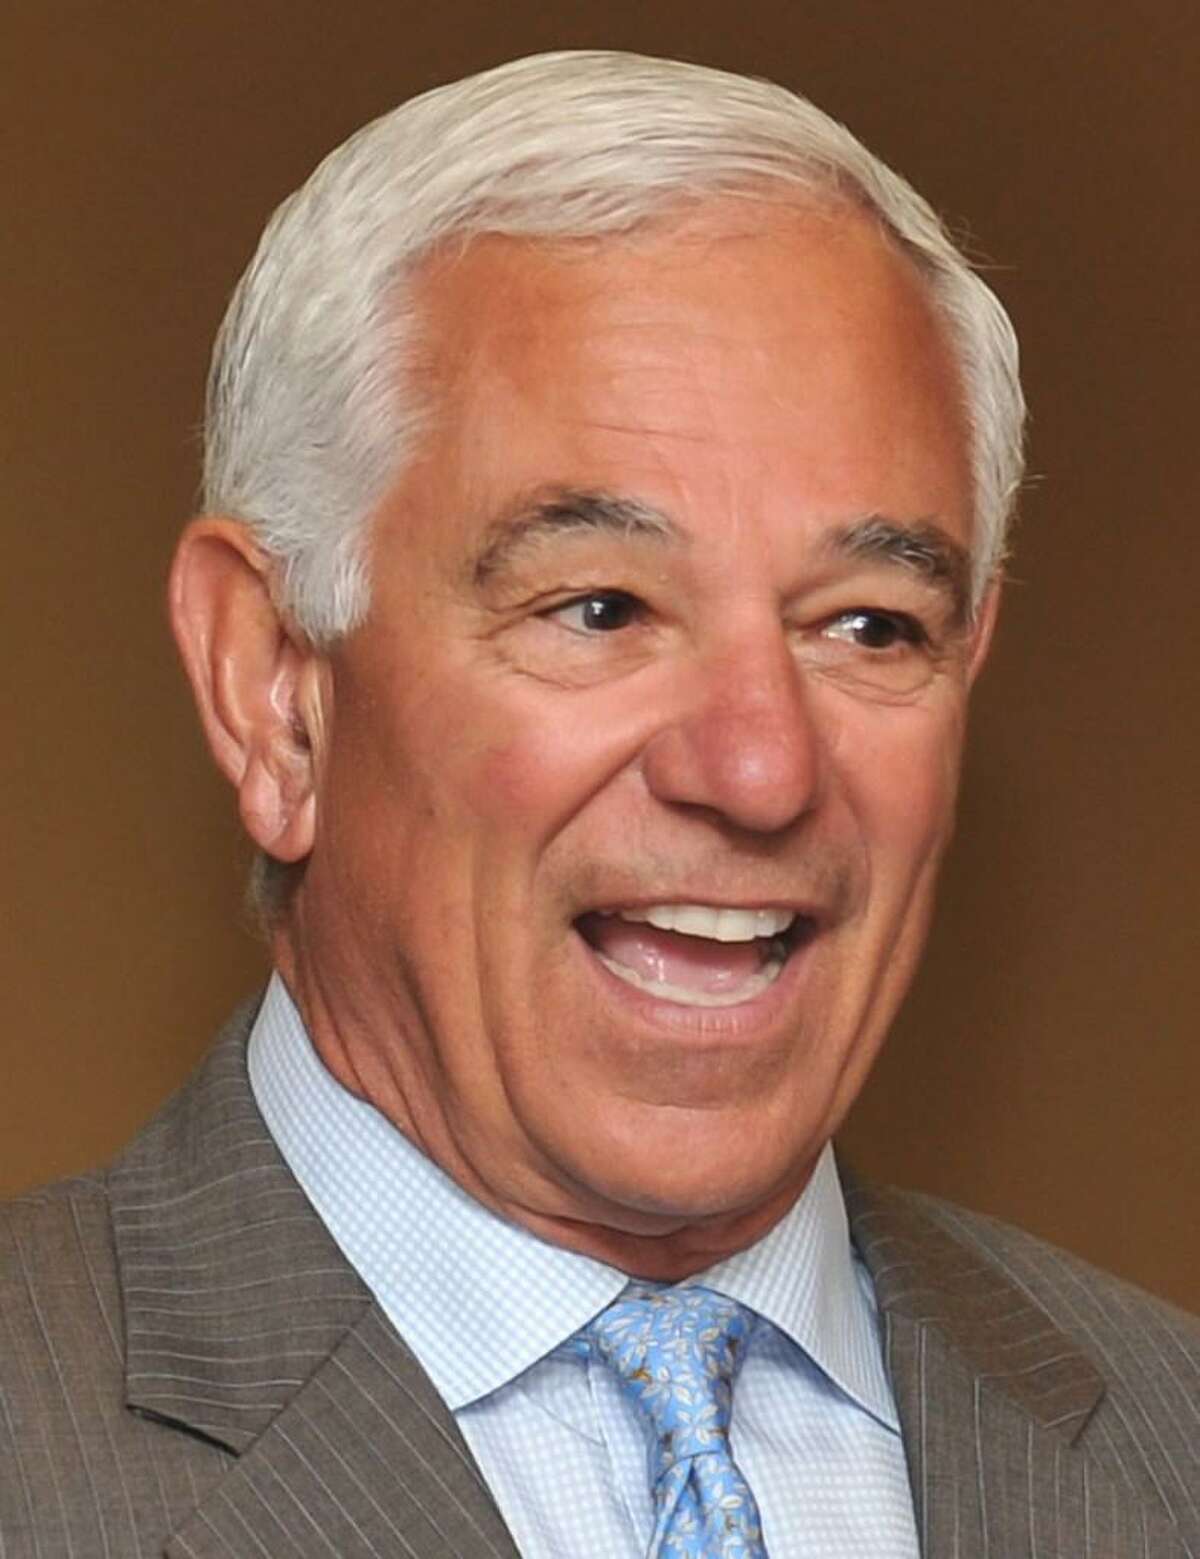 Bobby Valentine at the Fairfield County Sports Commission Hall of Fame Dinner held on October 17, 2016 at the Greenwich Hyatt in Greenwich, Connecticut. Bobby Valentine’s Sports Academy is planning to open in March in a new location in the River Bend Center in Stamford’s Springdale section.